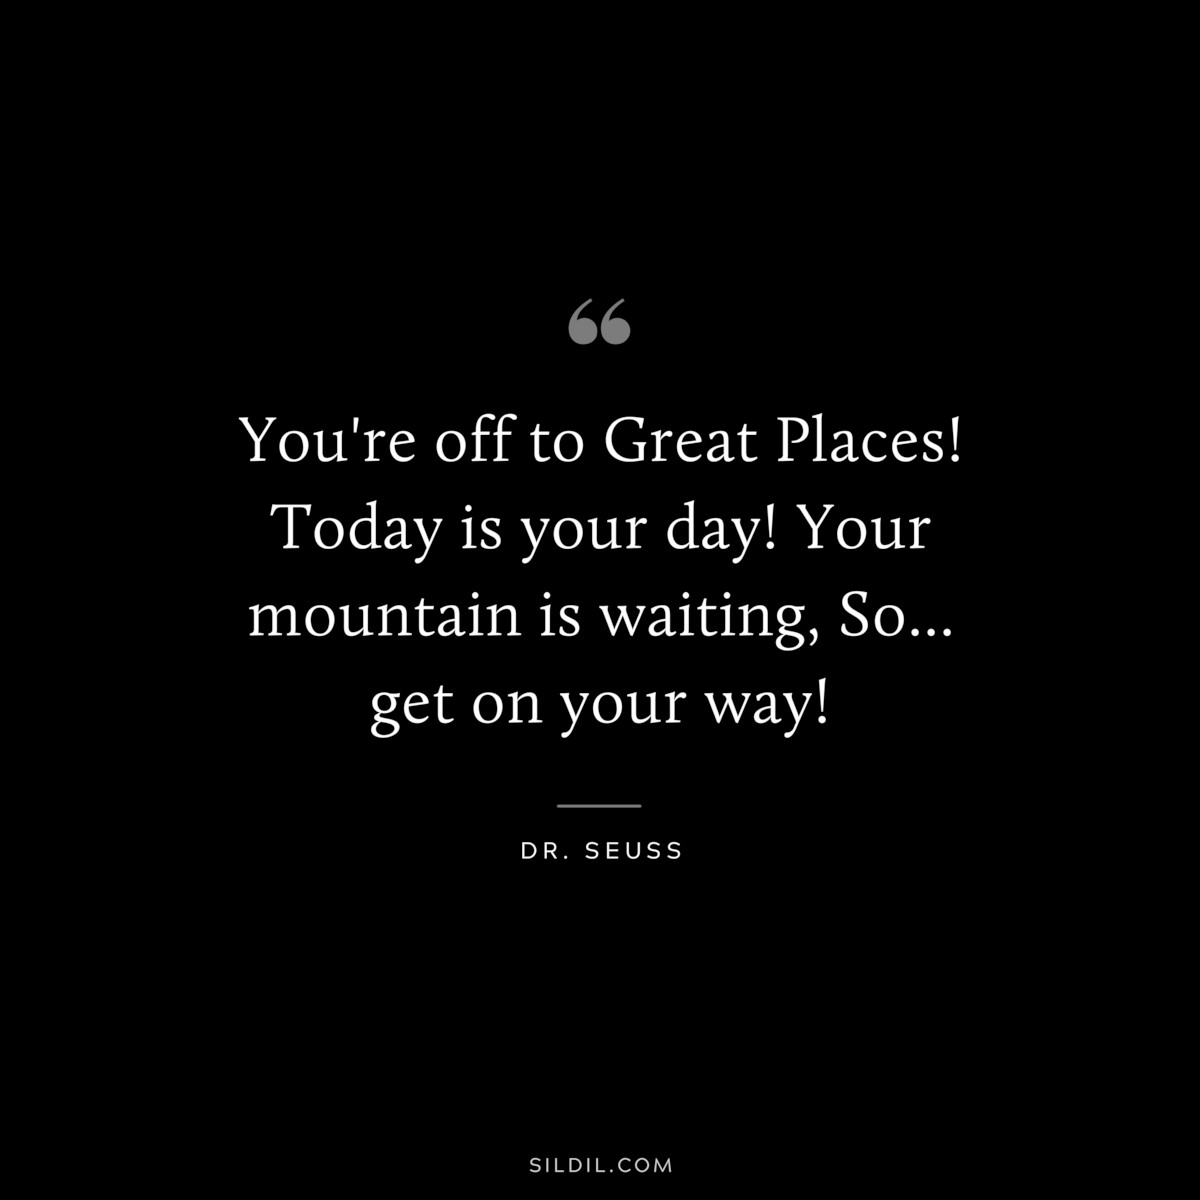 You're off to Great Places! Today is your day! Your mountain is waiting, So... get on your way! ― Dr. Seuss